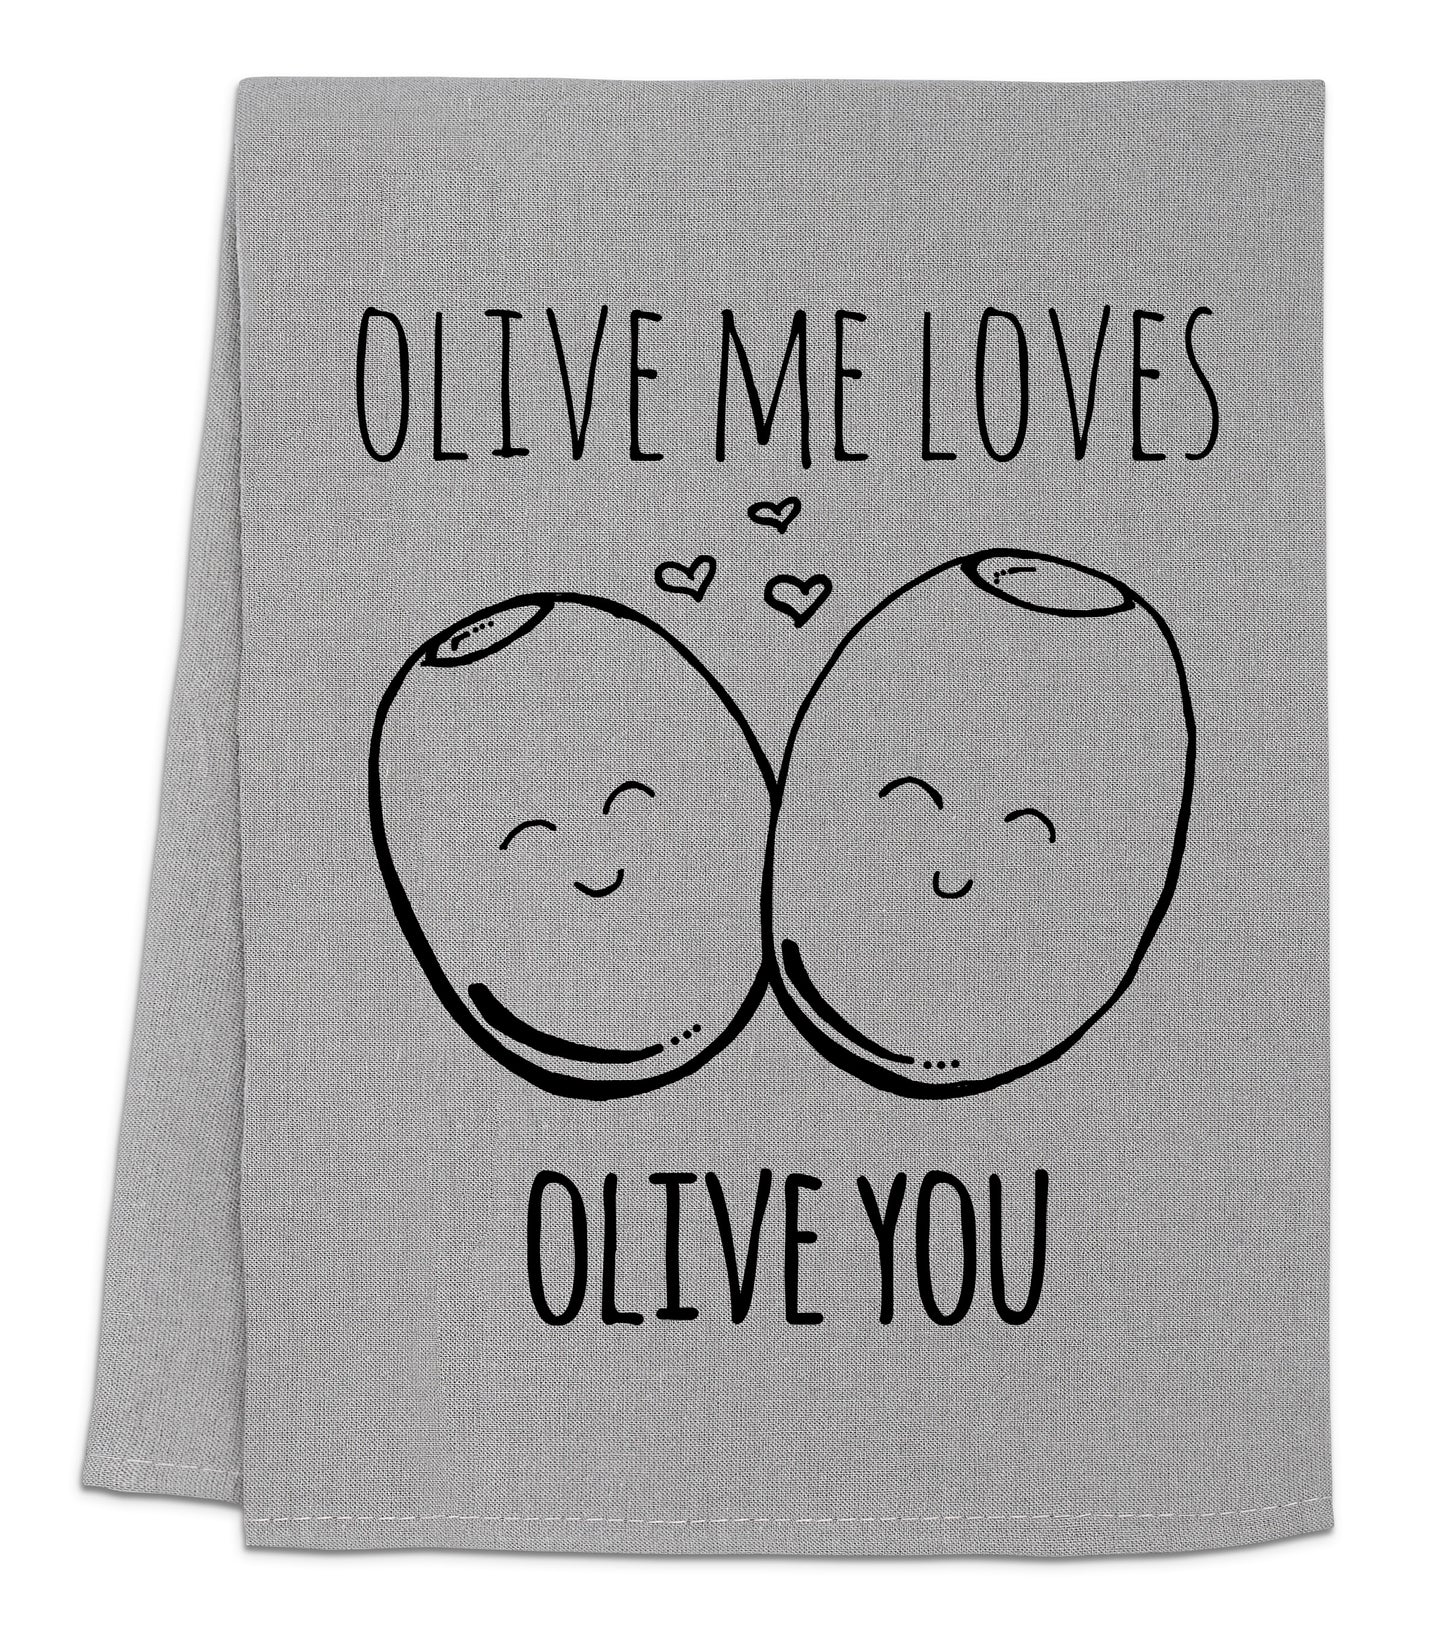 a towel with two apples on it that says olive me loves olive you